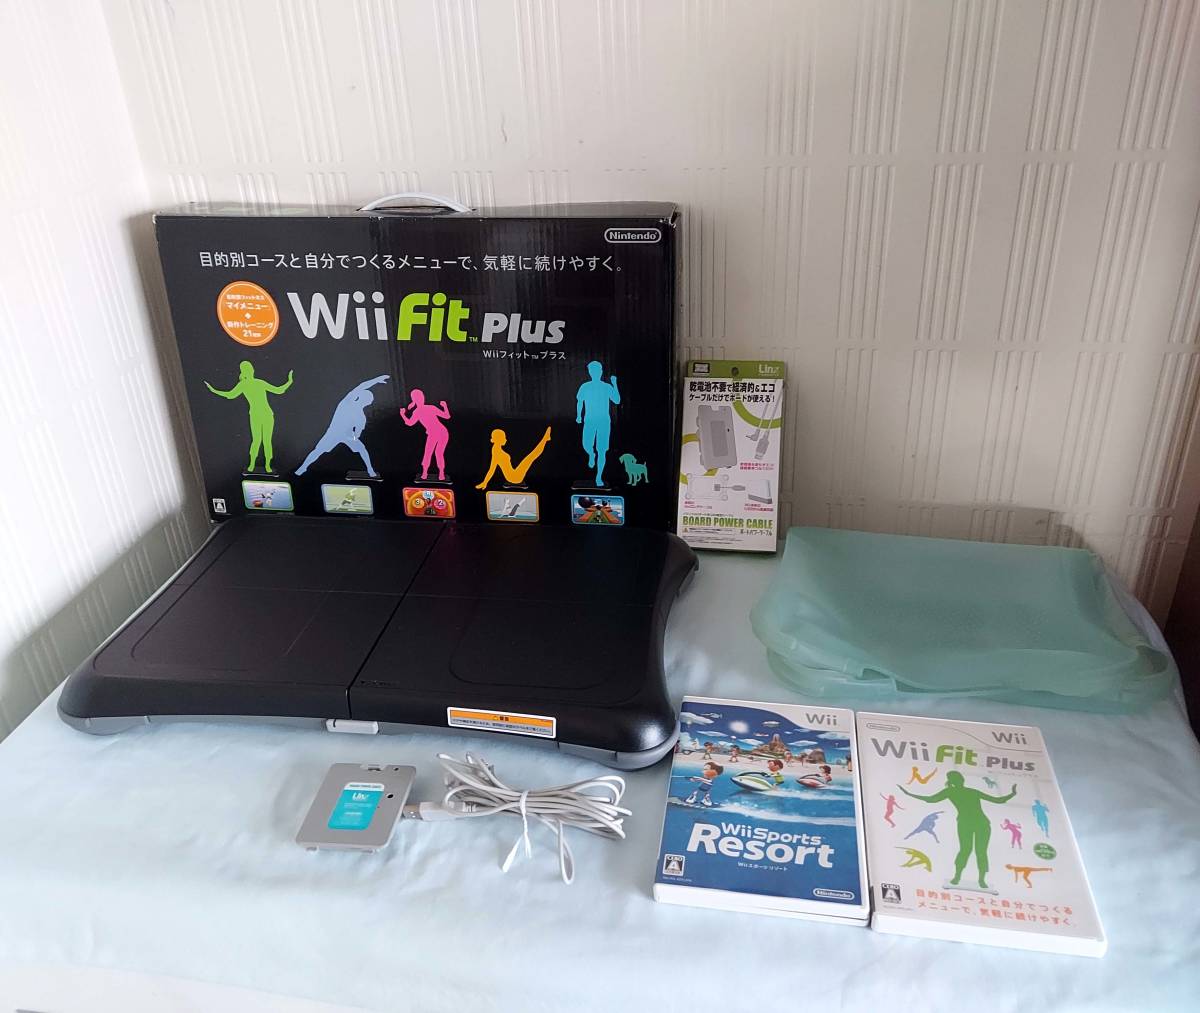 ●wii ゲーム fit plus/バランスWiiボード/Wiiスポーツリゾート/ボードパワーケーブル●_画像1